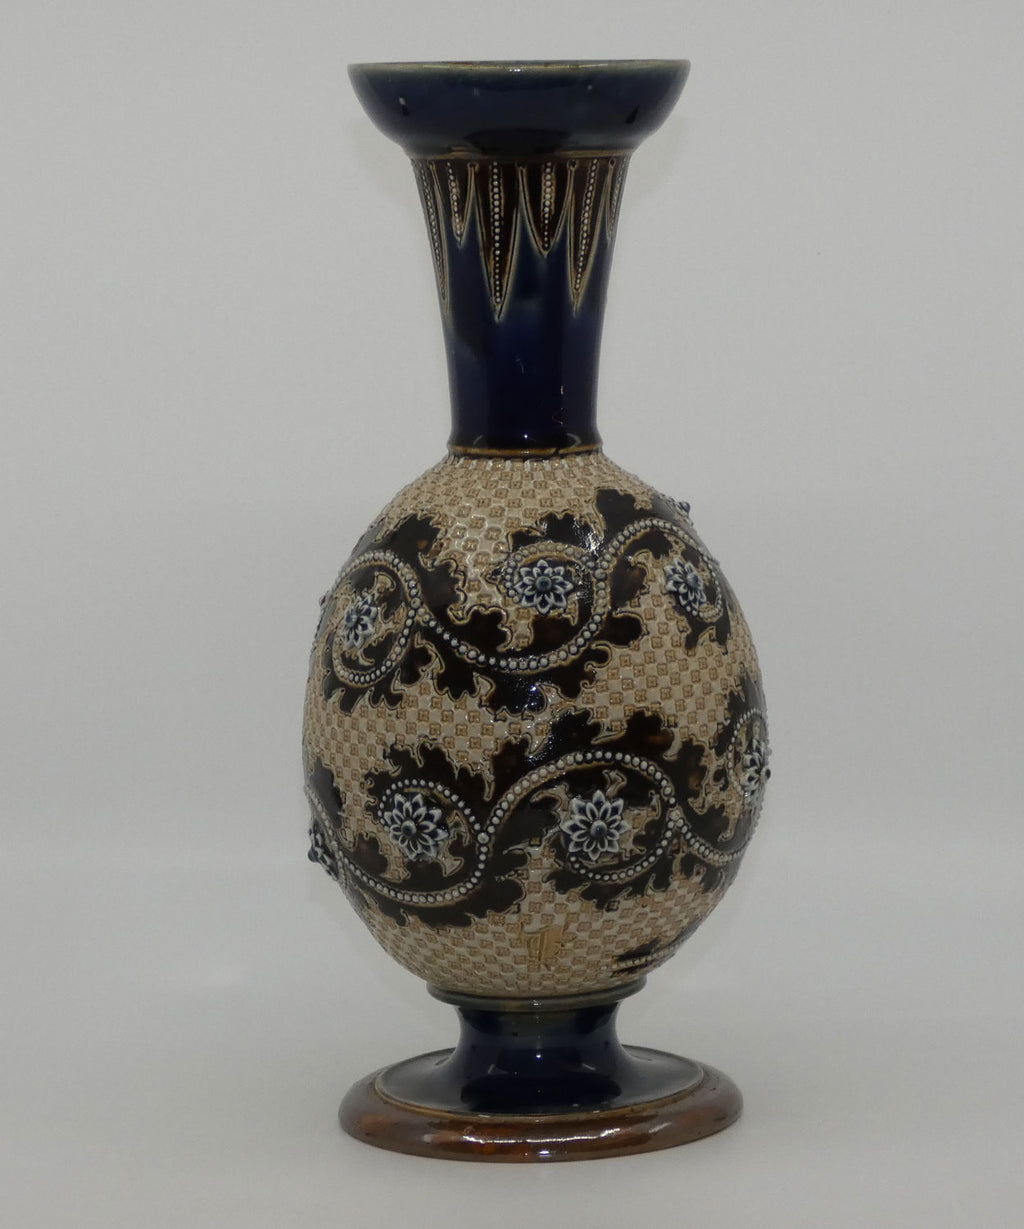 doulton-lambeth-george-tinworth-footed-base-vase-brown-and-blue